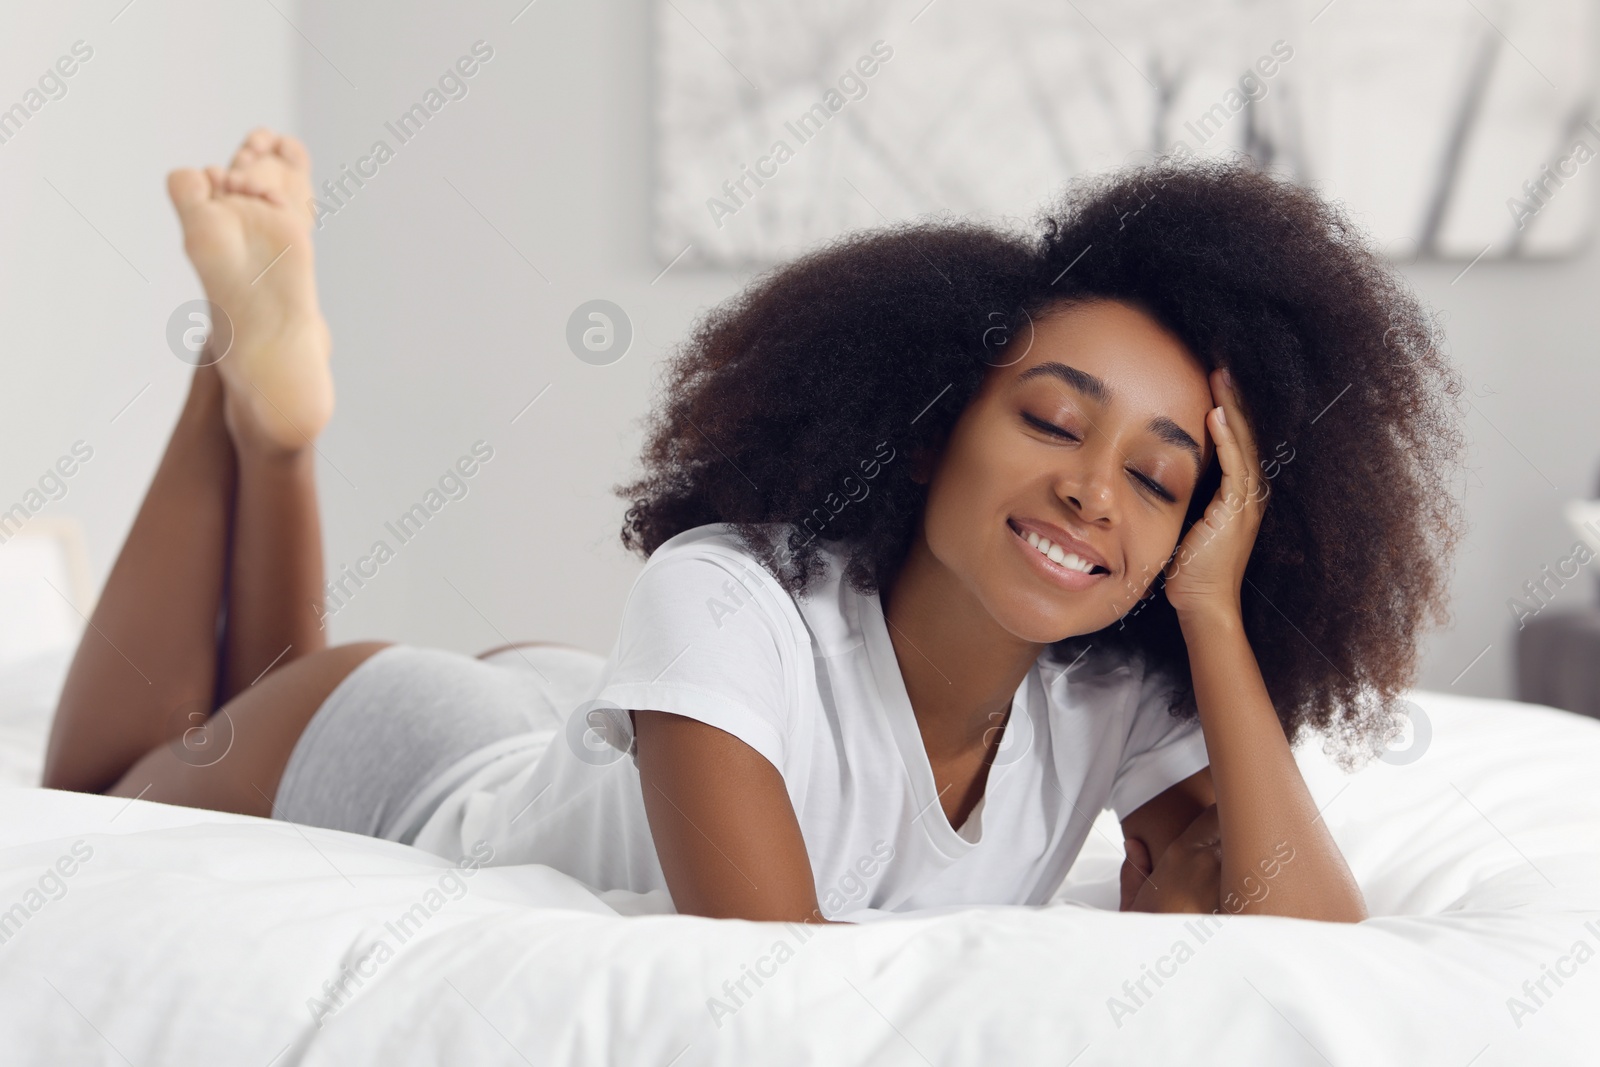 Photo of Beautiful woman in stylish underwear and t-shirt on bed indoors